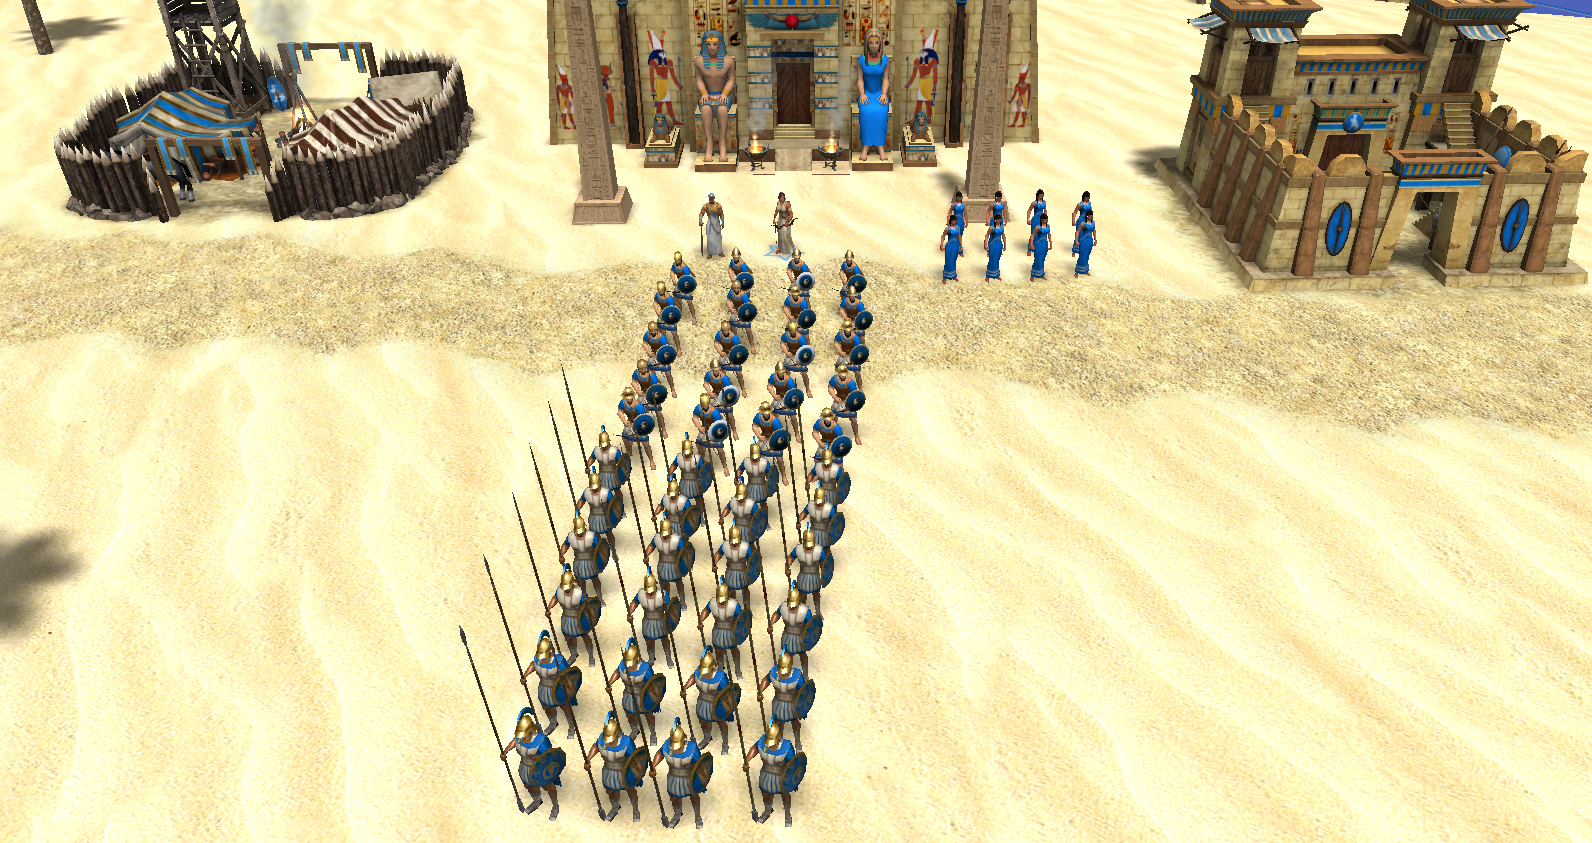 kleopatra 5 image - Fall And Rise Of Egypt mod for 0 A.D. Empires Ascendant.